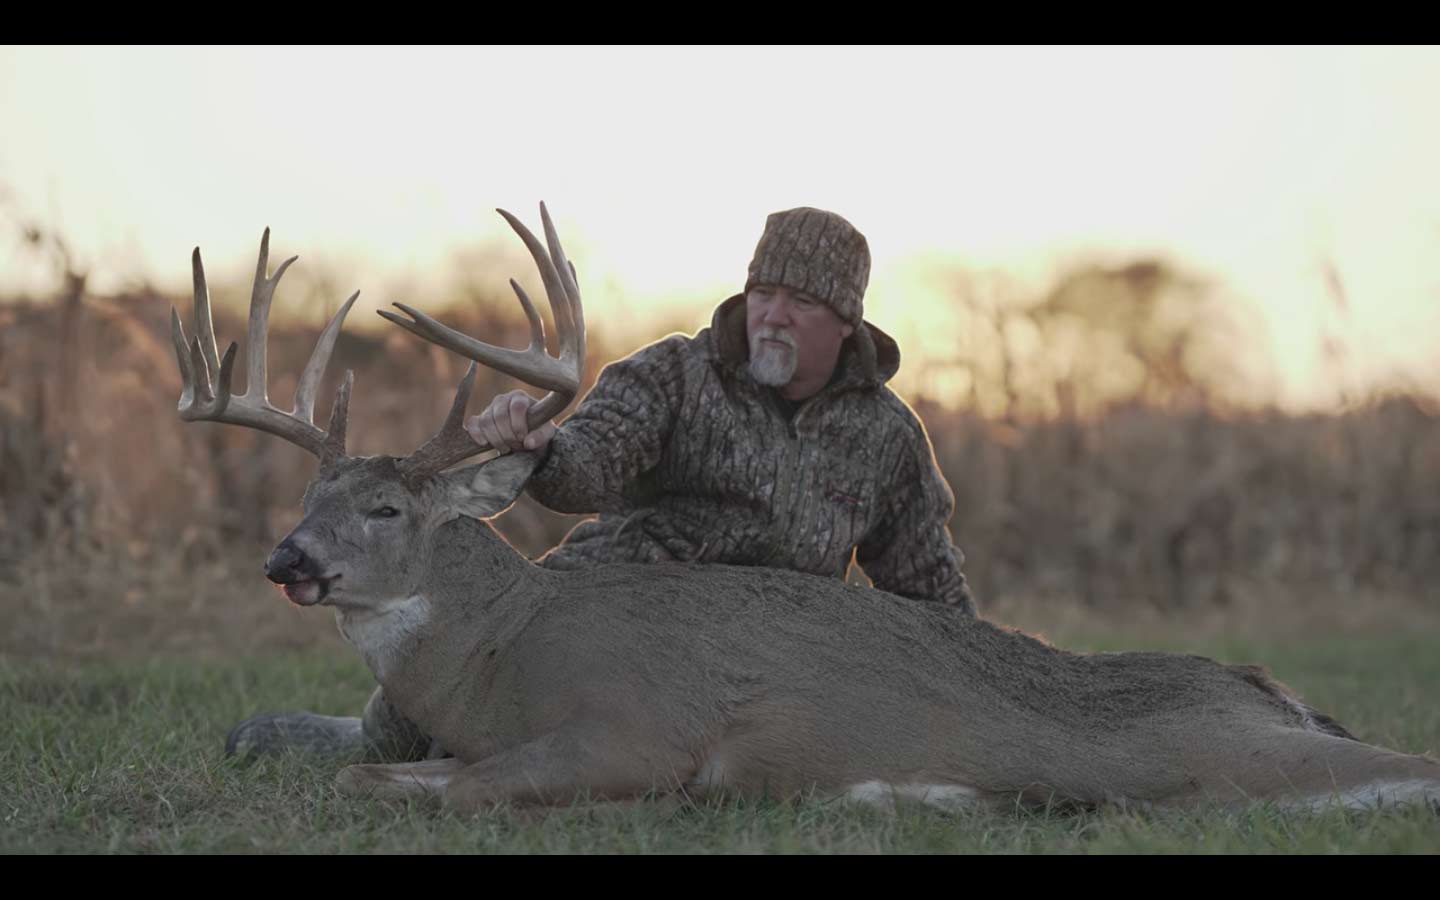 A hunter kneels next to a dropped whitetail deer and holds its antlers.